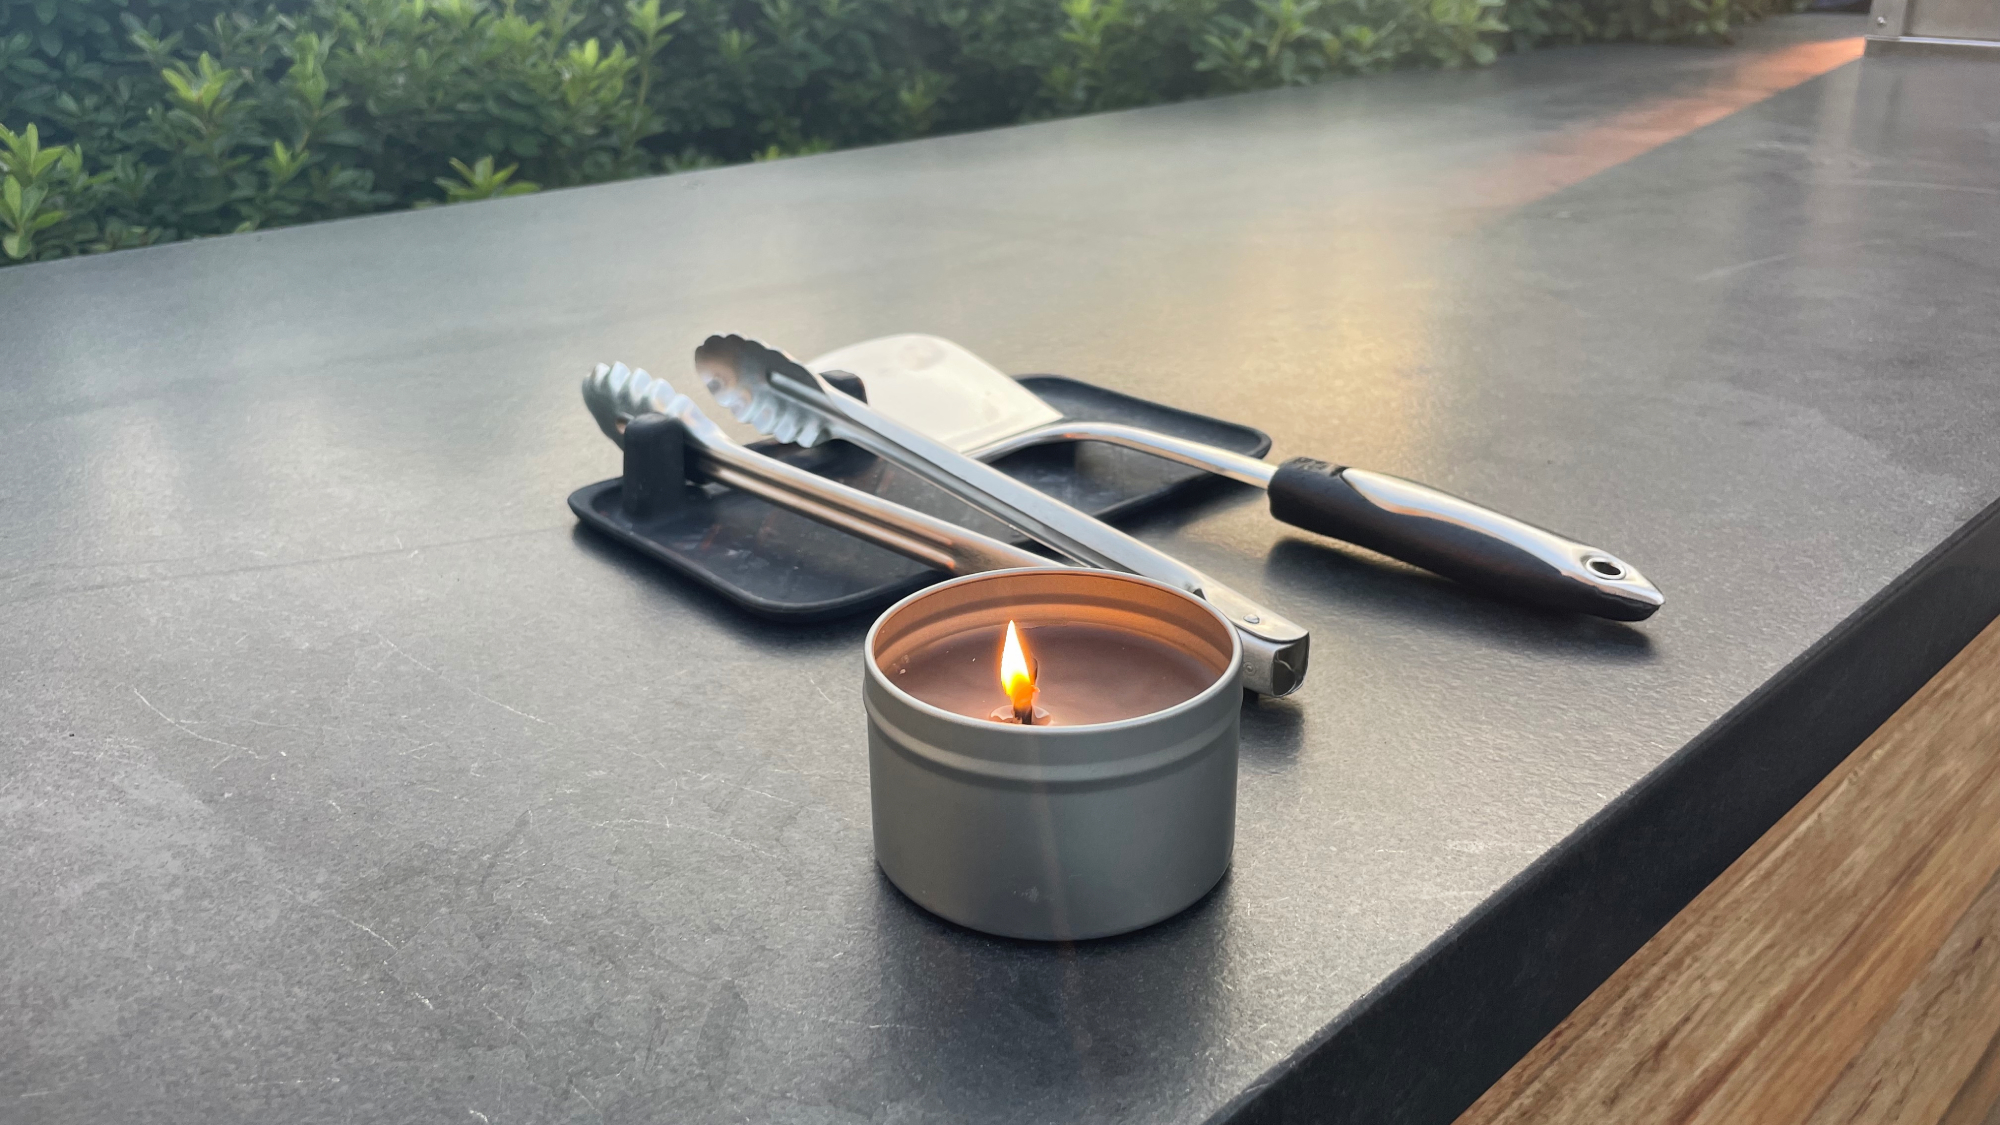 A DIY citronella candle in a small metal candle tin on a black surface outside.